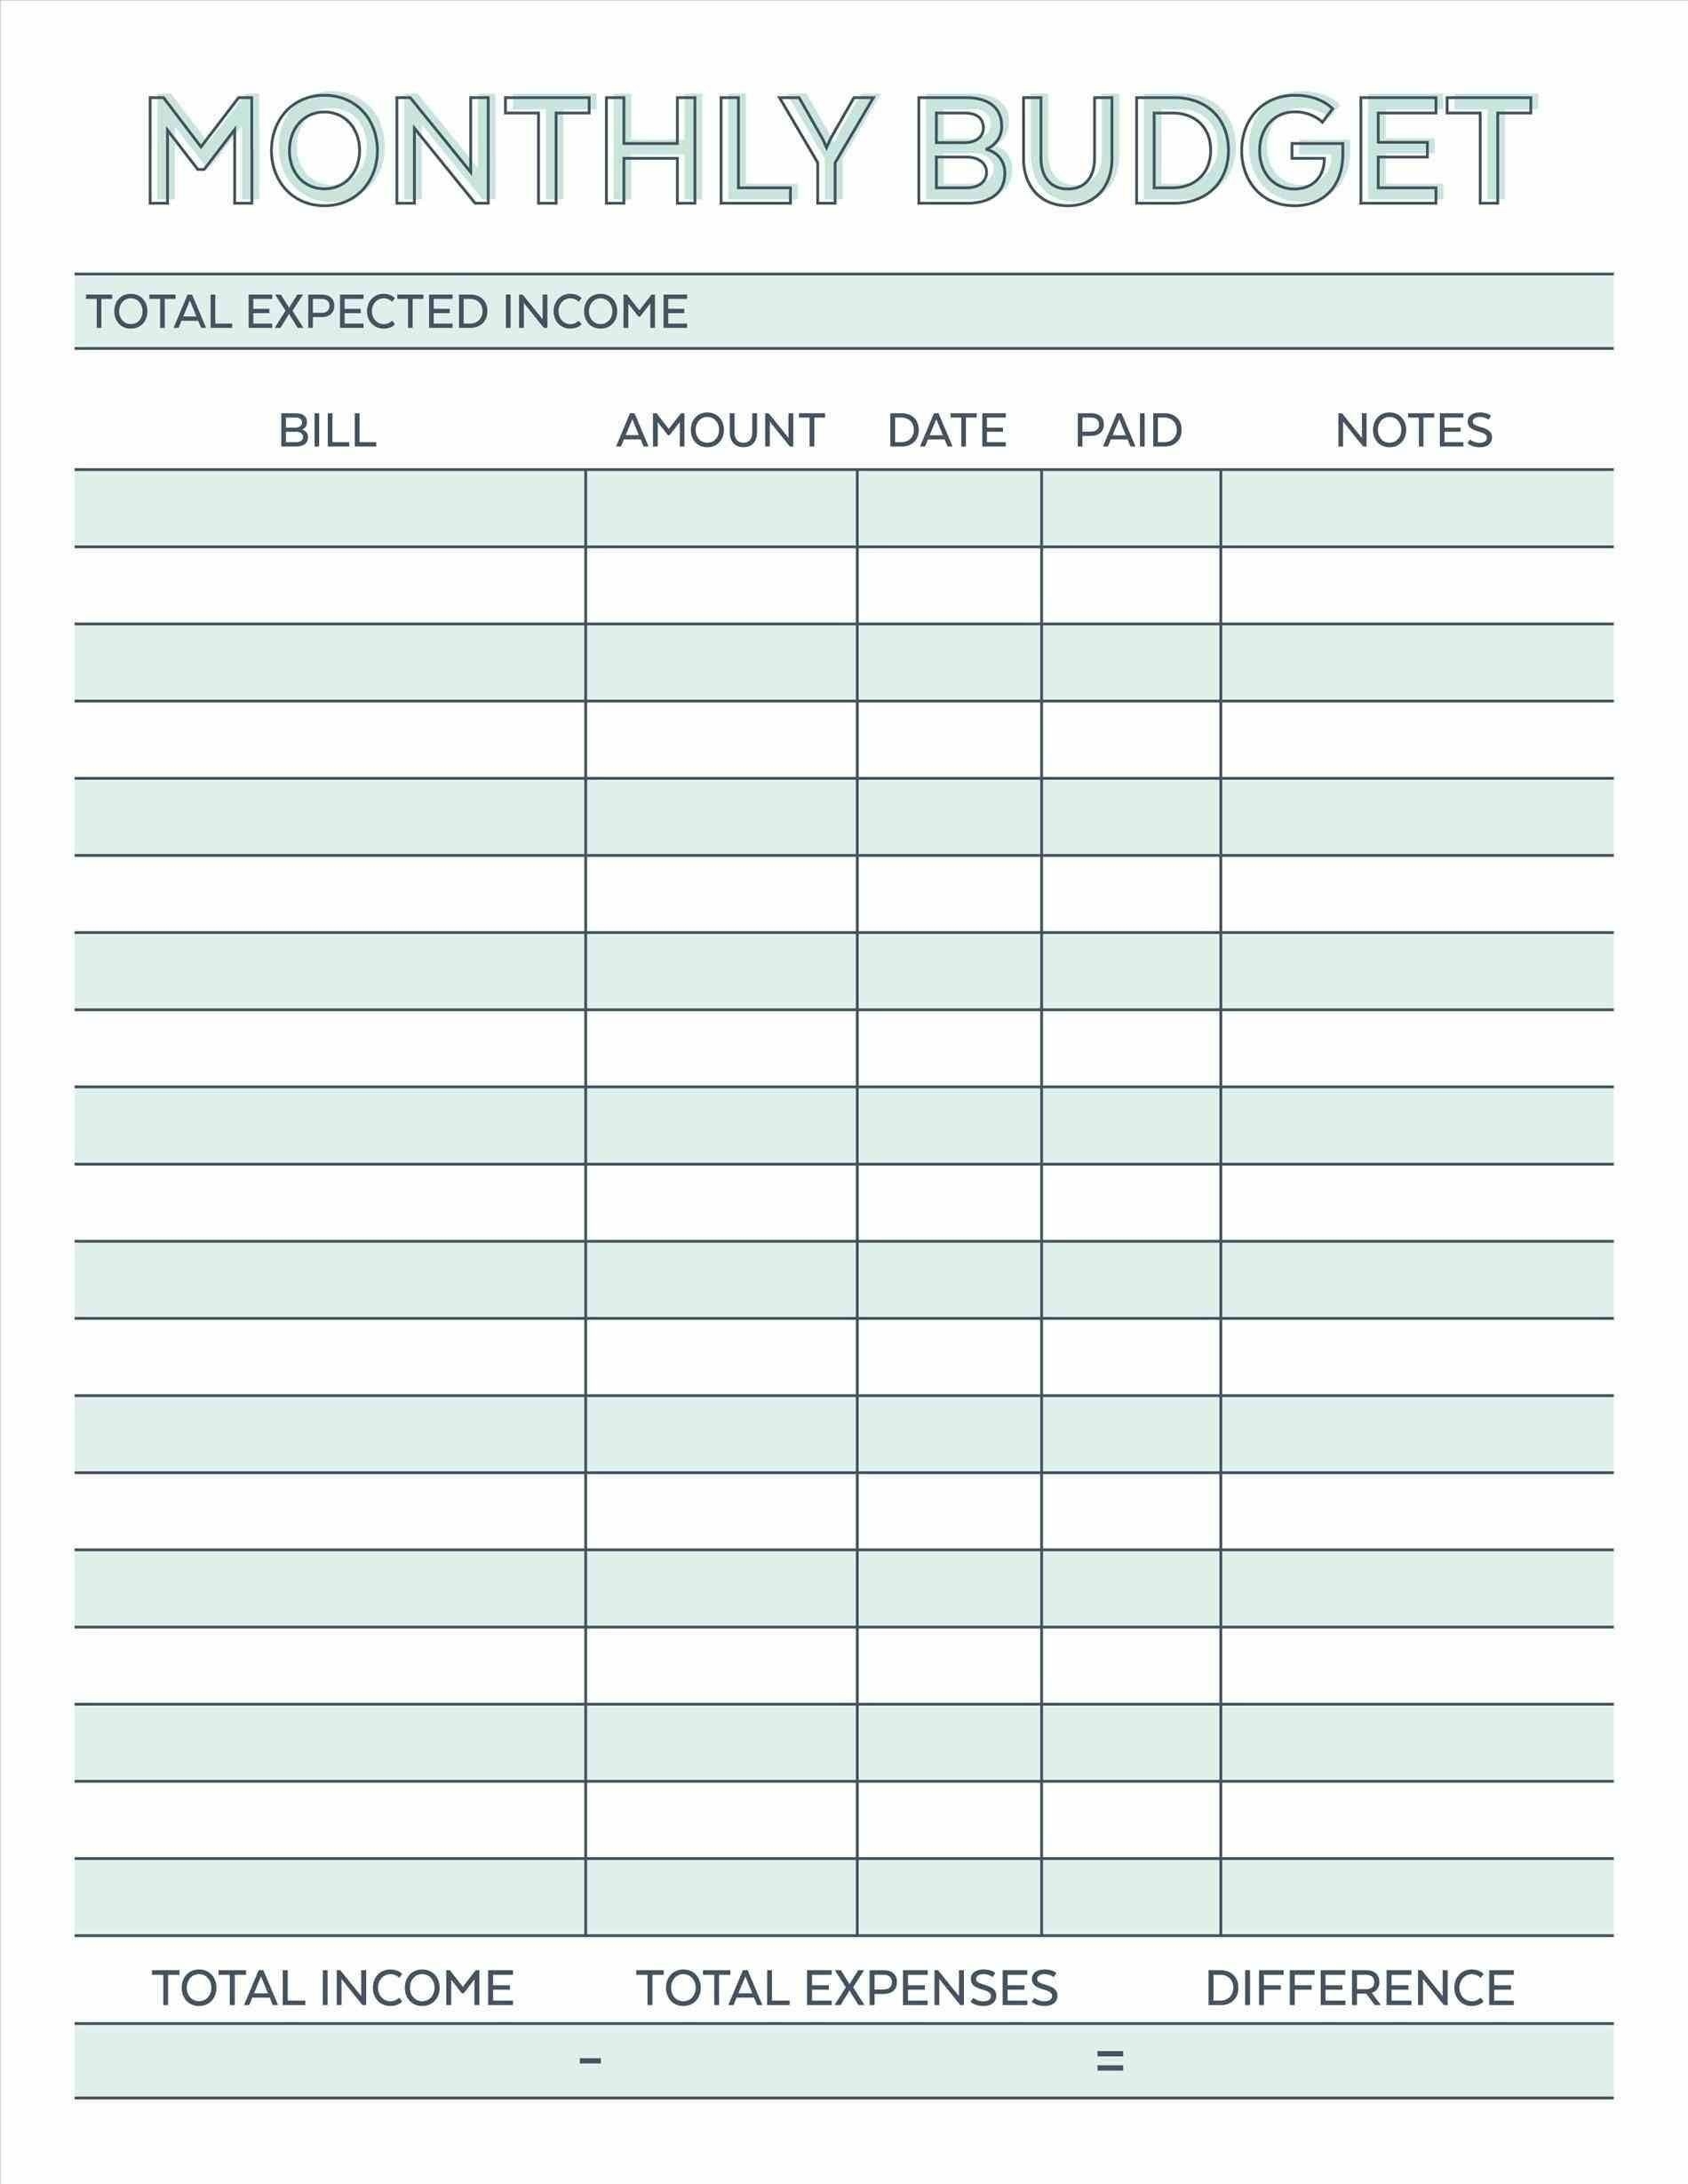 Free Monthly Budget Spreadsheet Template In 2020 | Budget  Monthly Bills Spreadsheet